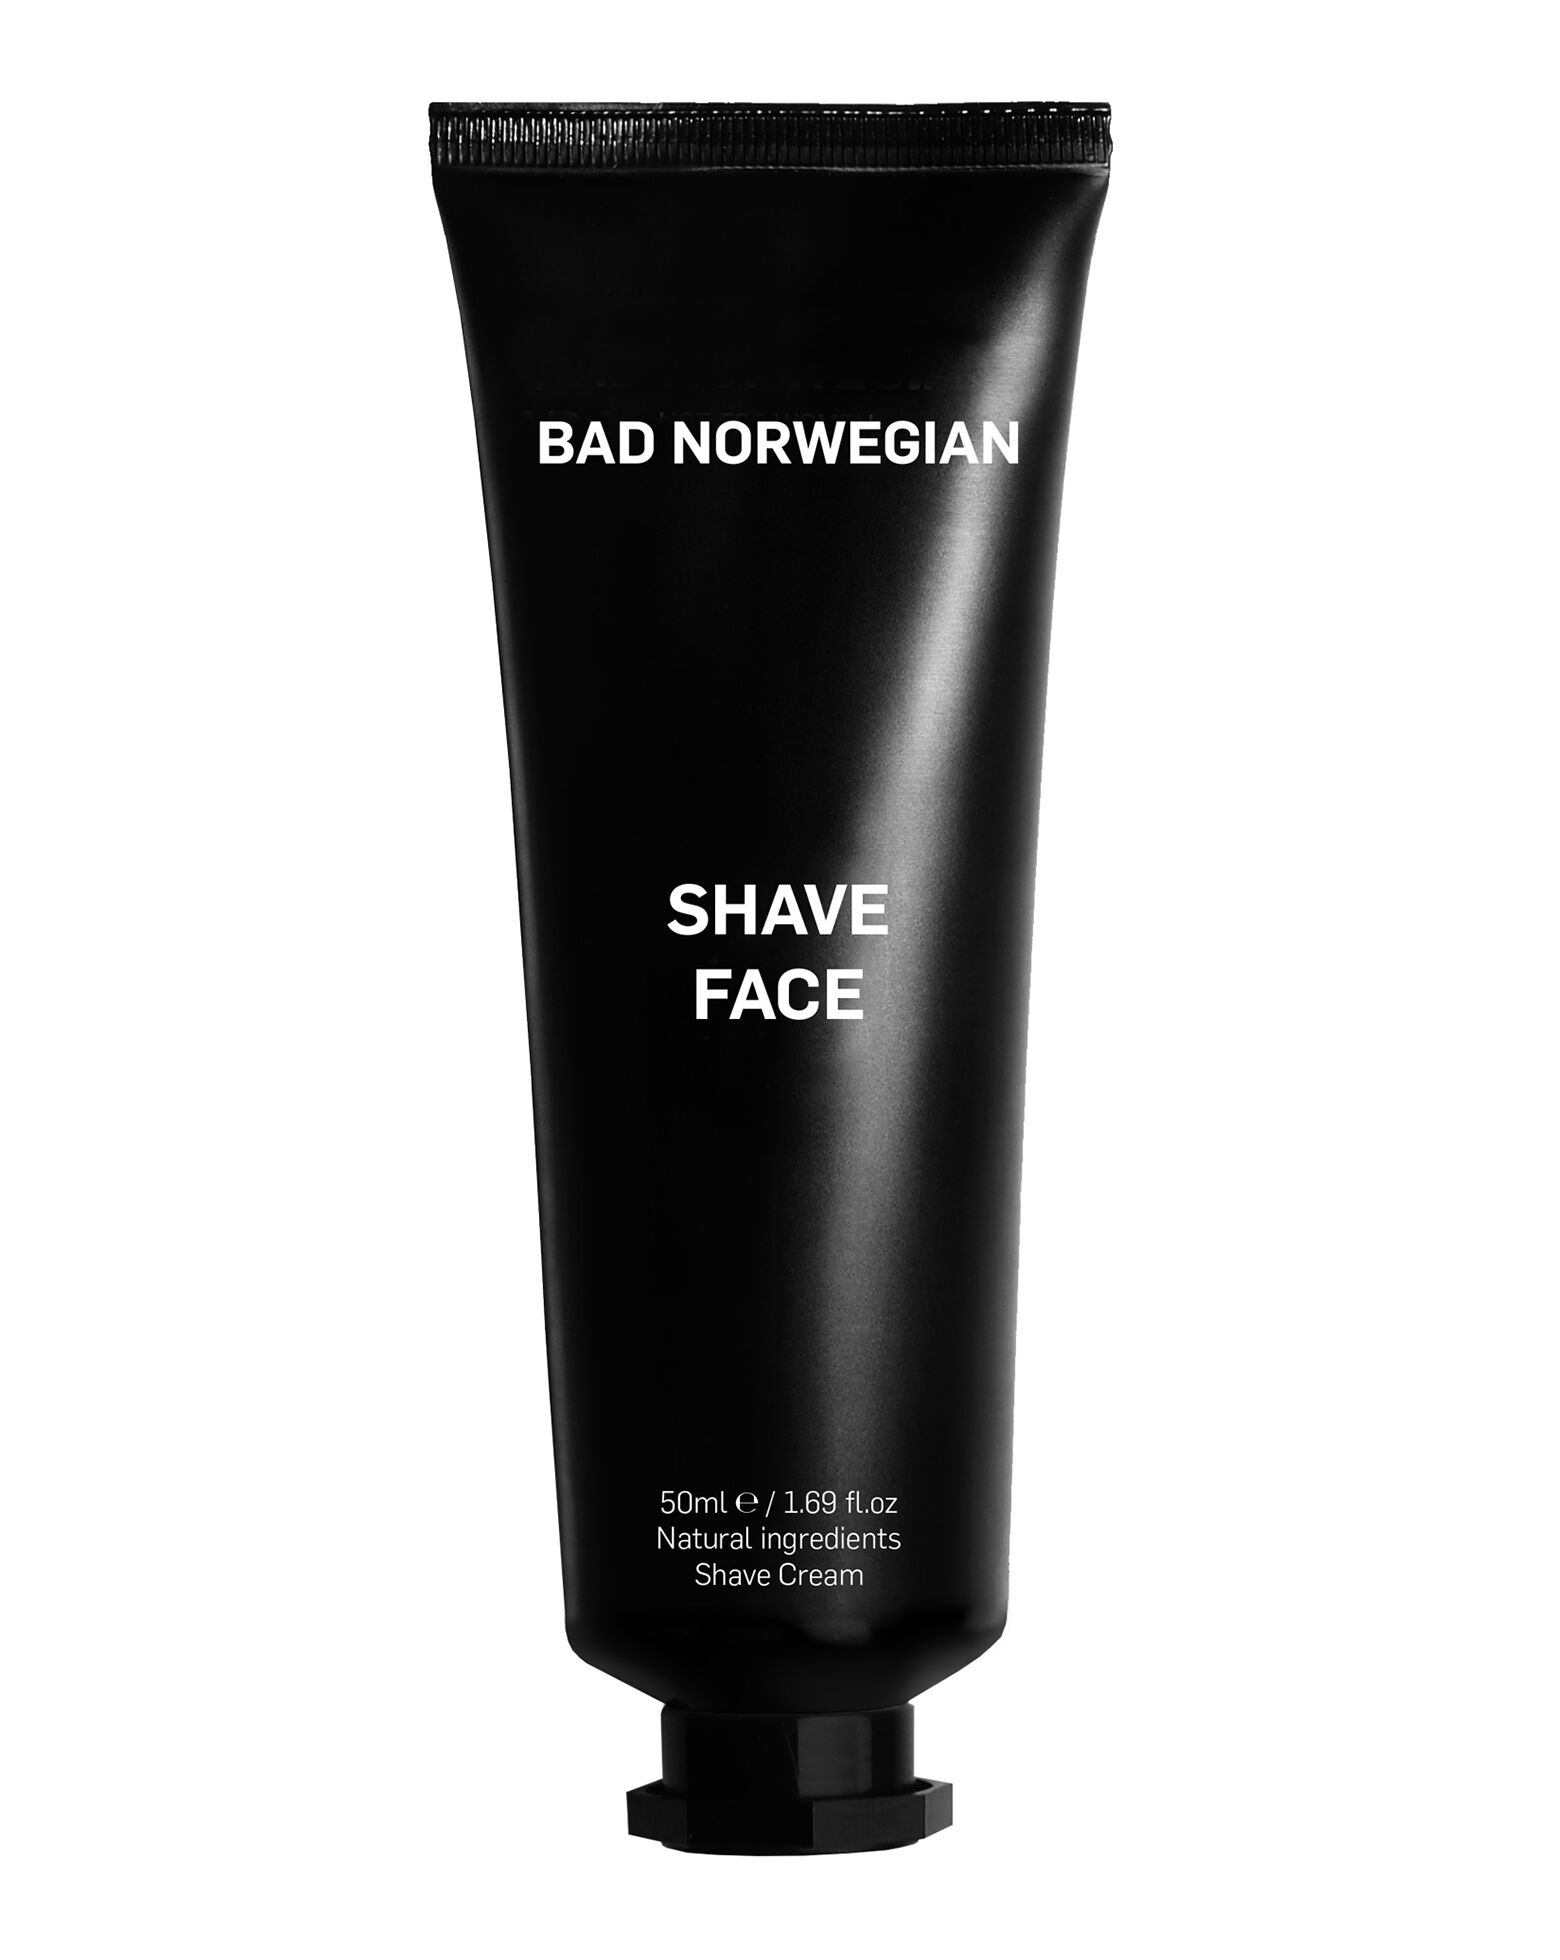 BAD NORWEGIAN - Shave Face